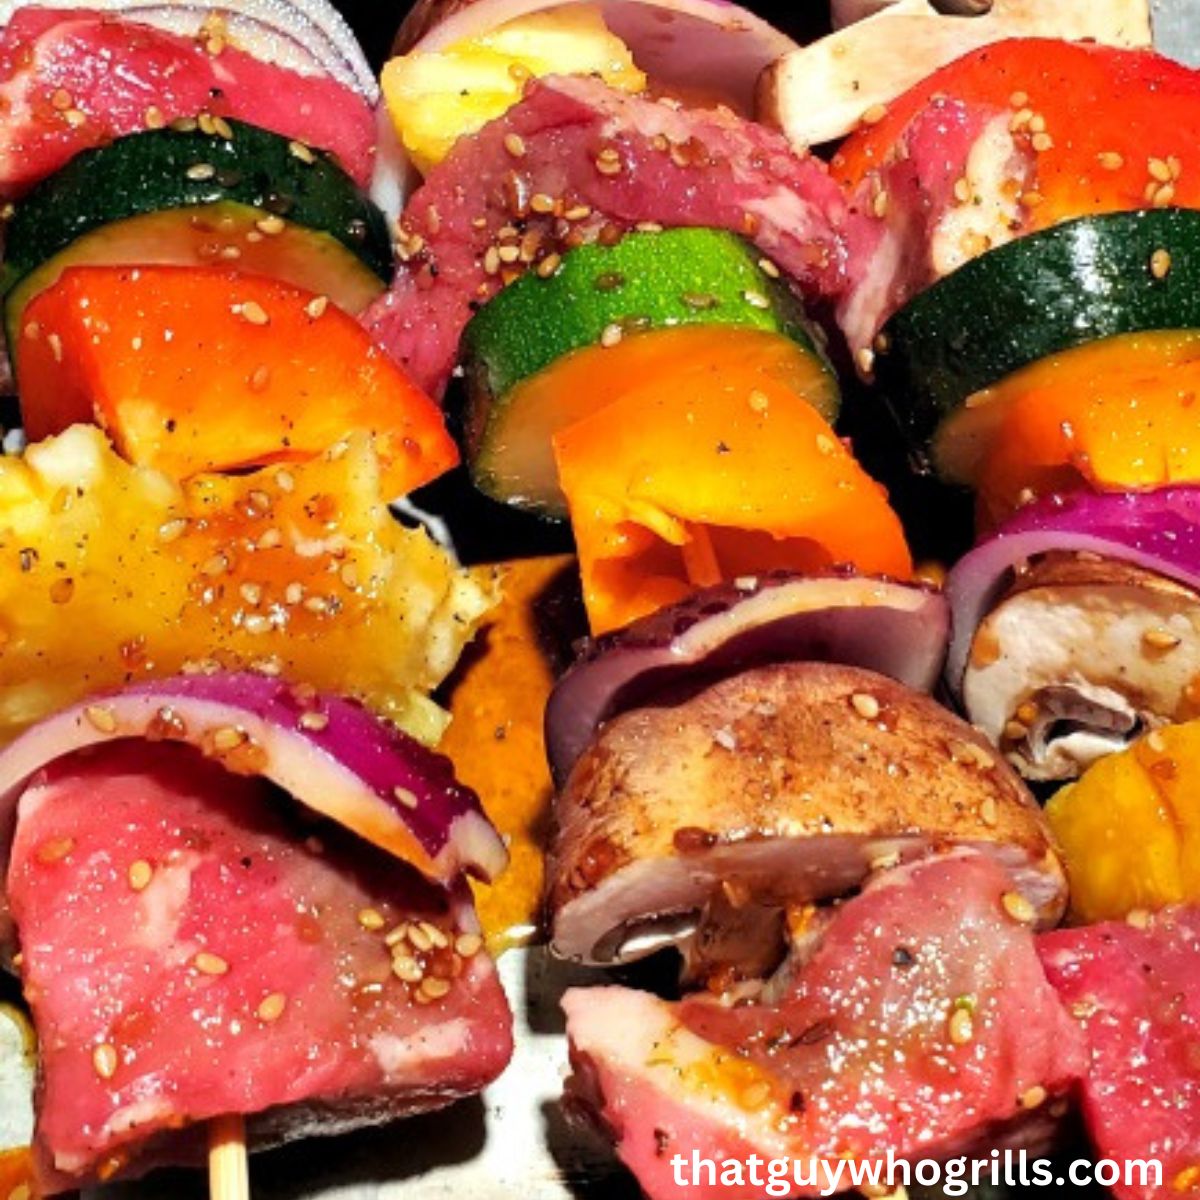 Kabobs with steak, red onions, mushrooms, bell peppers, and squash on them